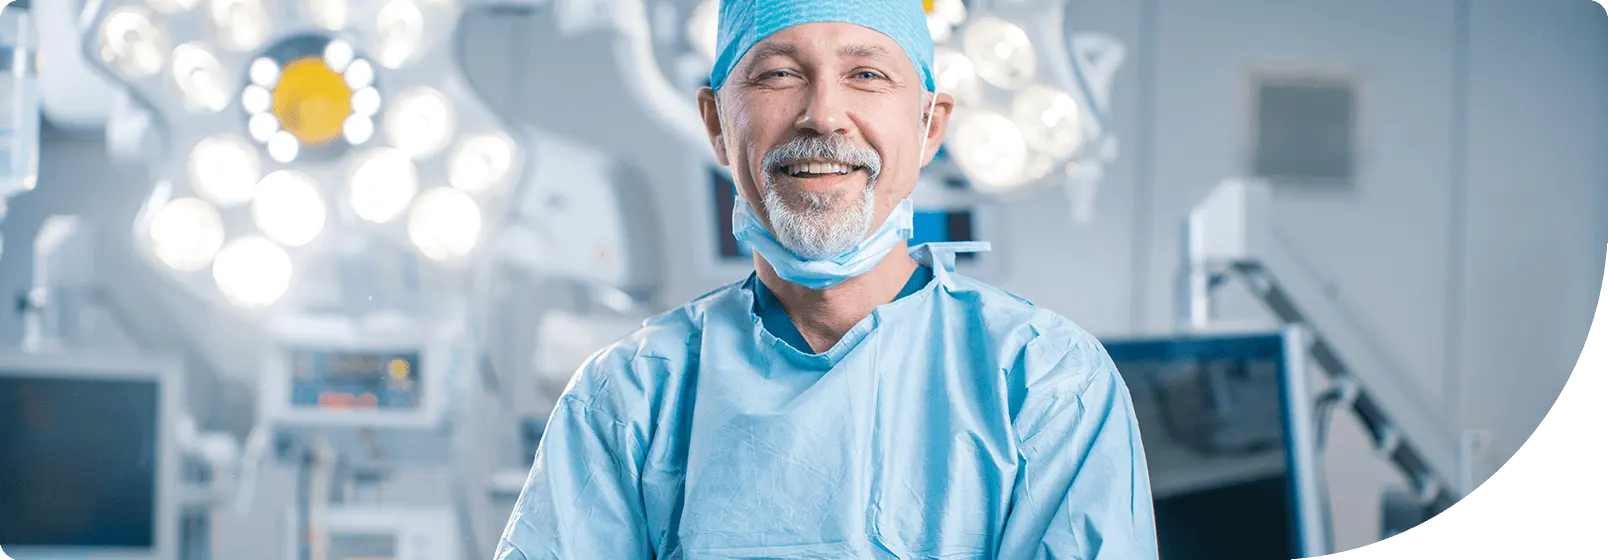 older male doctor wearing scrubs in the operating room